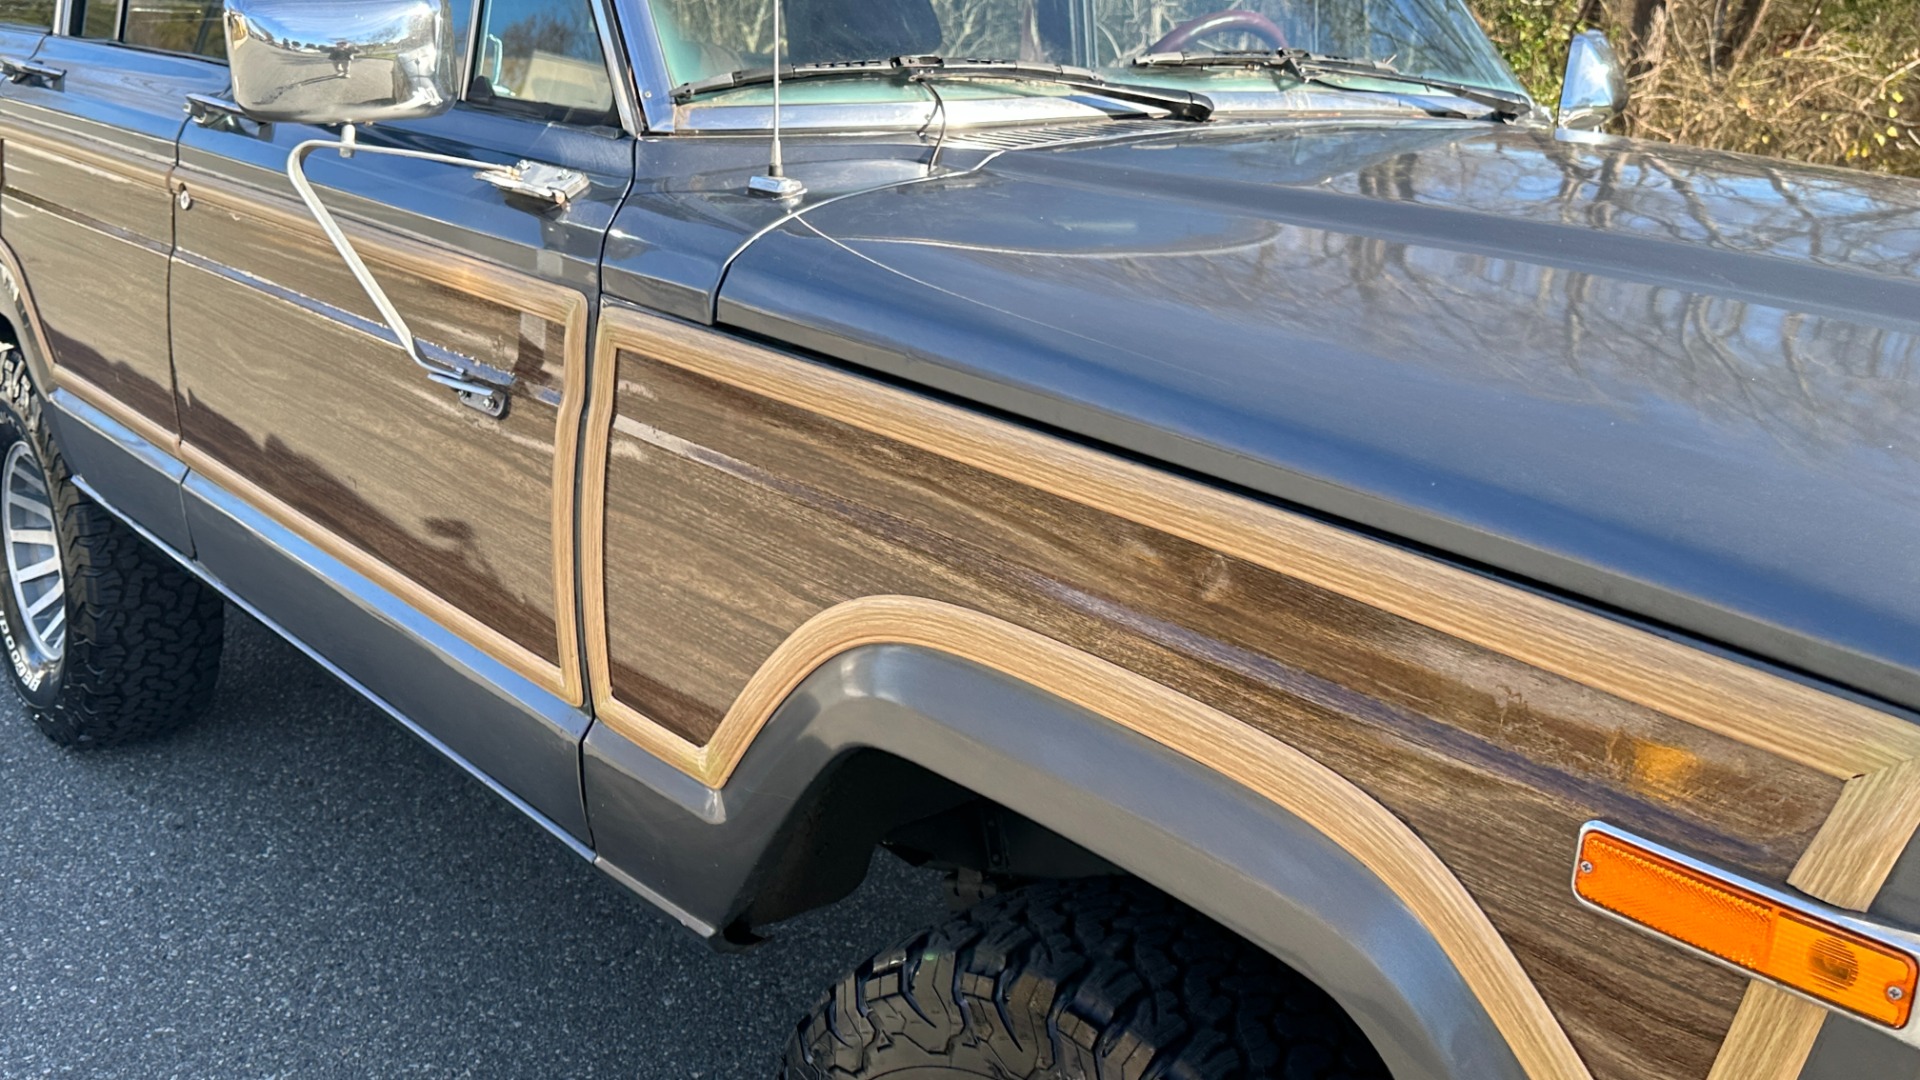 Used 1988 Jeep Grand Wagoneer 5.9L V8 ENGINE / LEATHER AND CLOTH / WOOD SIDING / 4WD for sale $21,995 at Formula Imports in Charlotte NC 28227 23